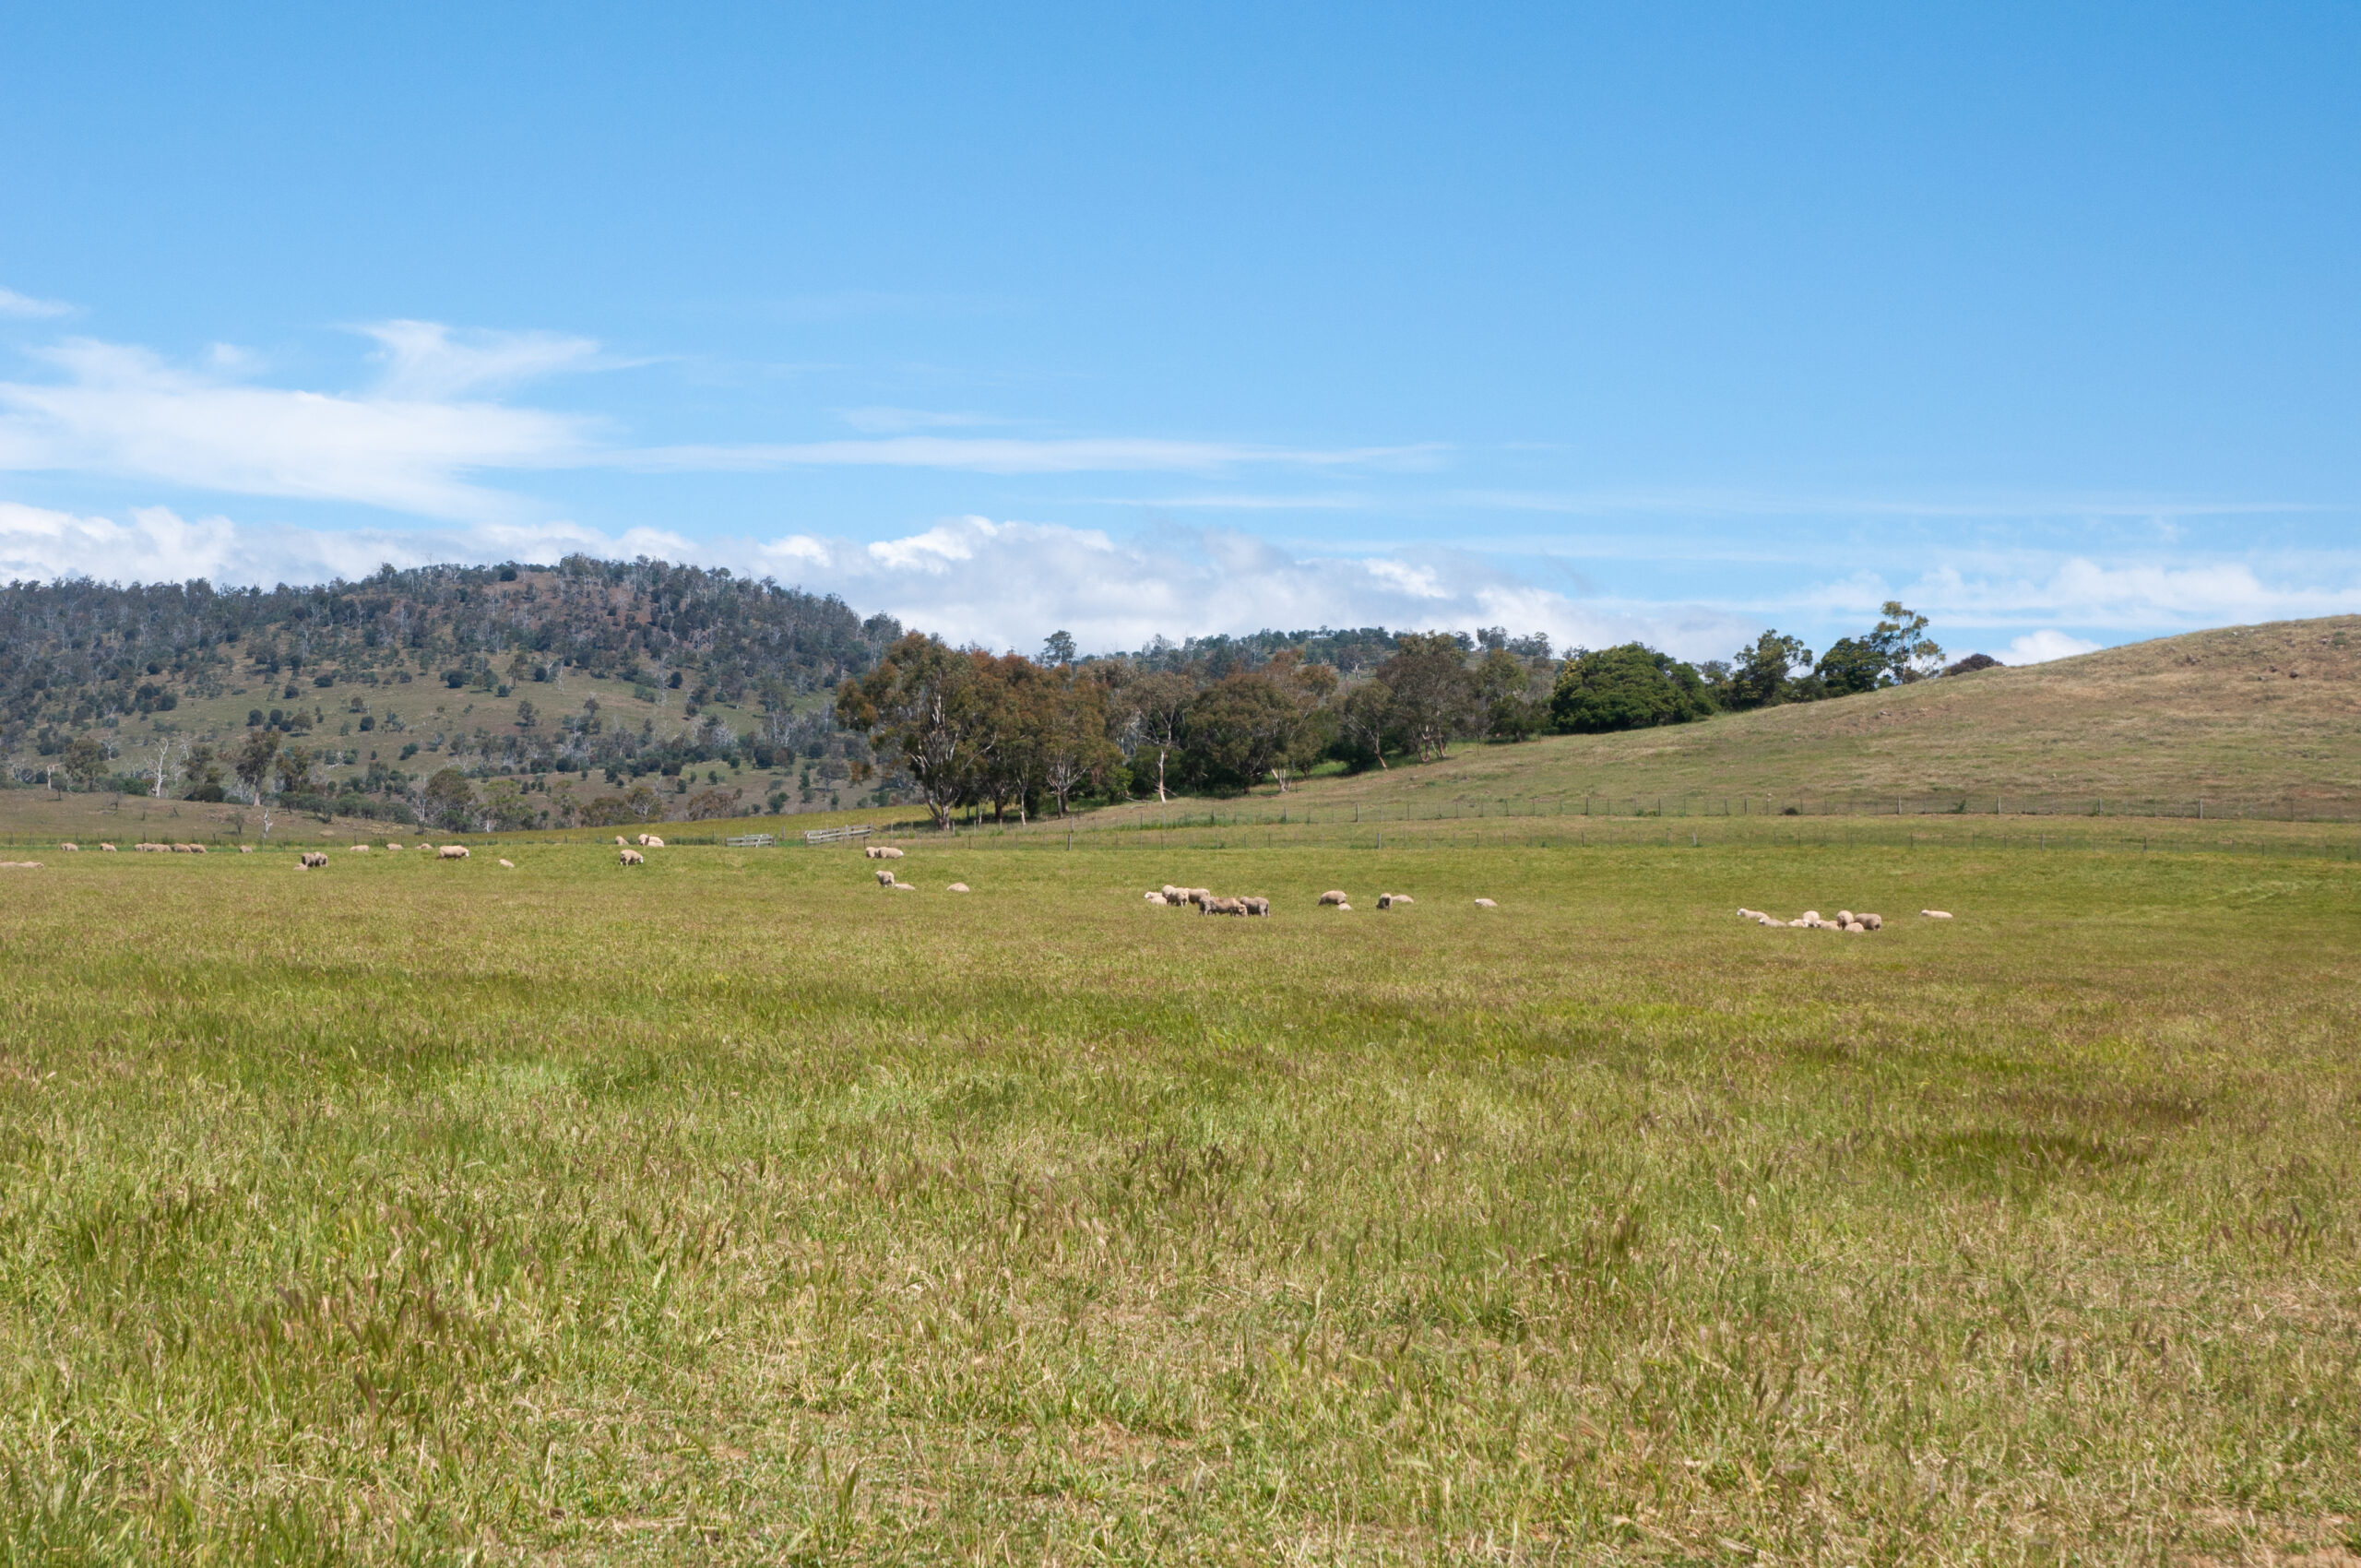 Hills and paddock with grazing sheep in the distance